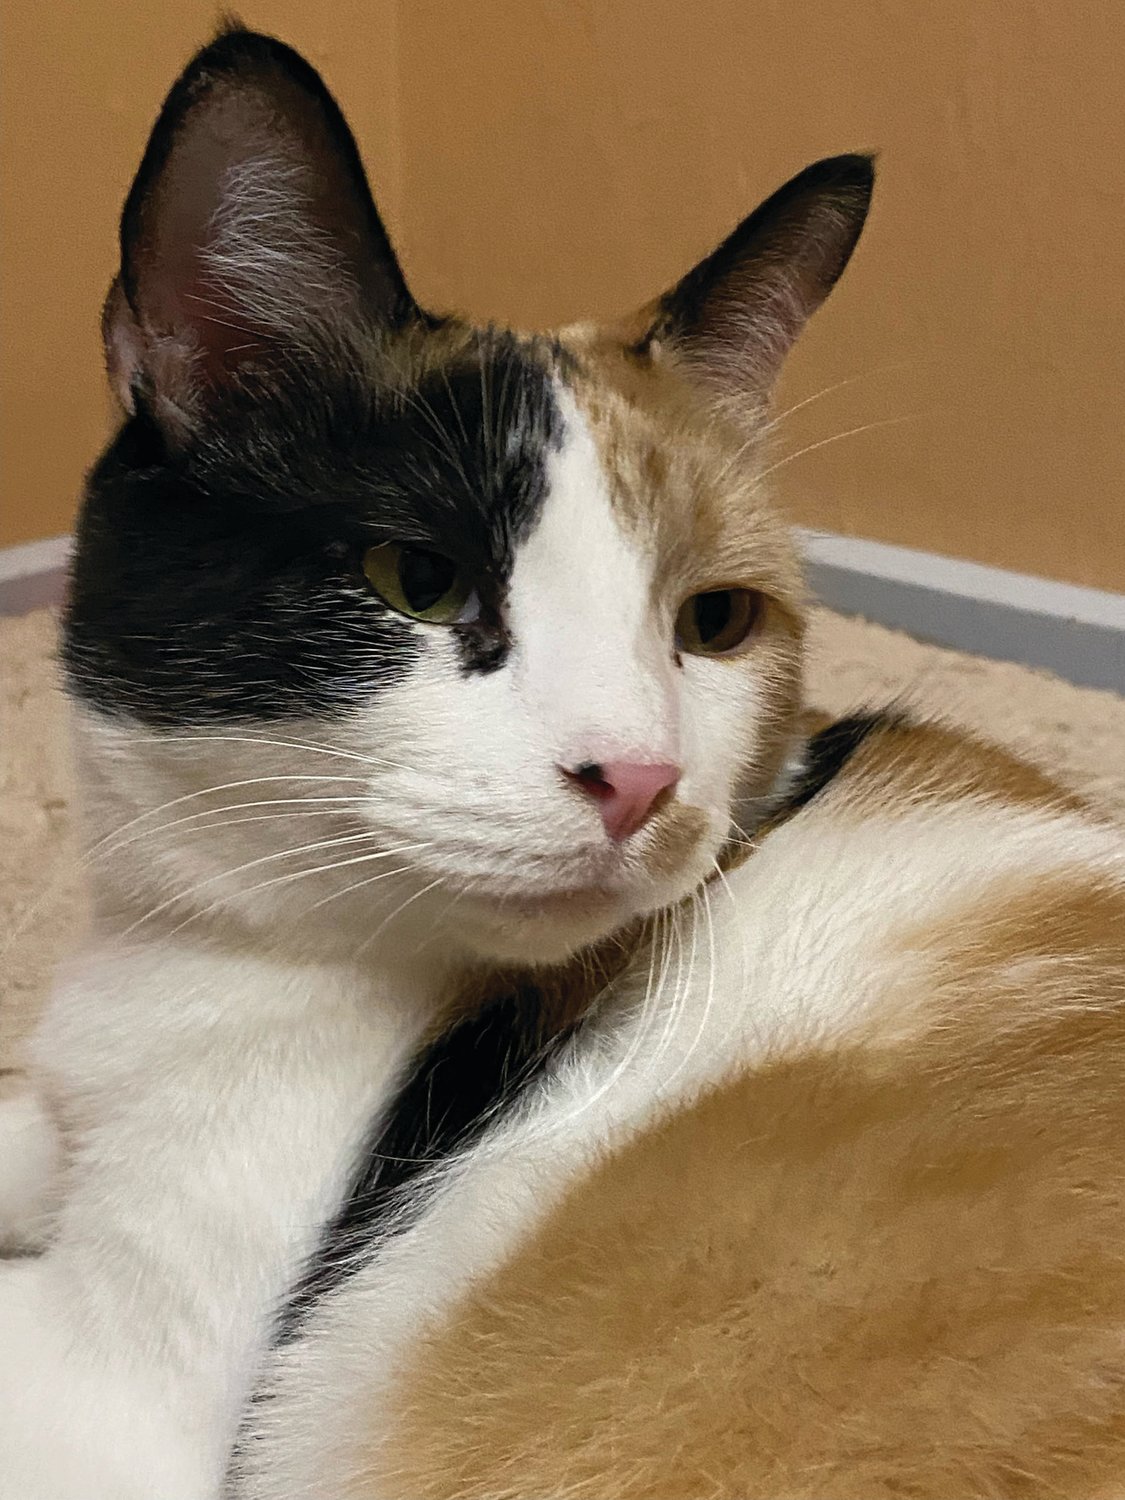 Puddin’ is calm and relaxed. She will be a great companion for some lucky human. Puddin’ is 2 1/2 years old.